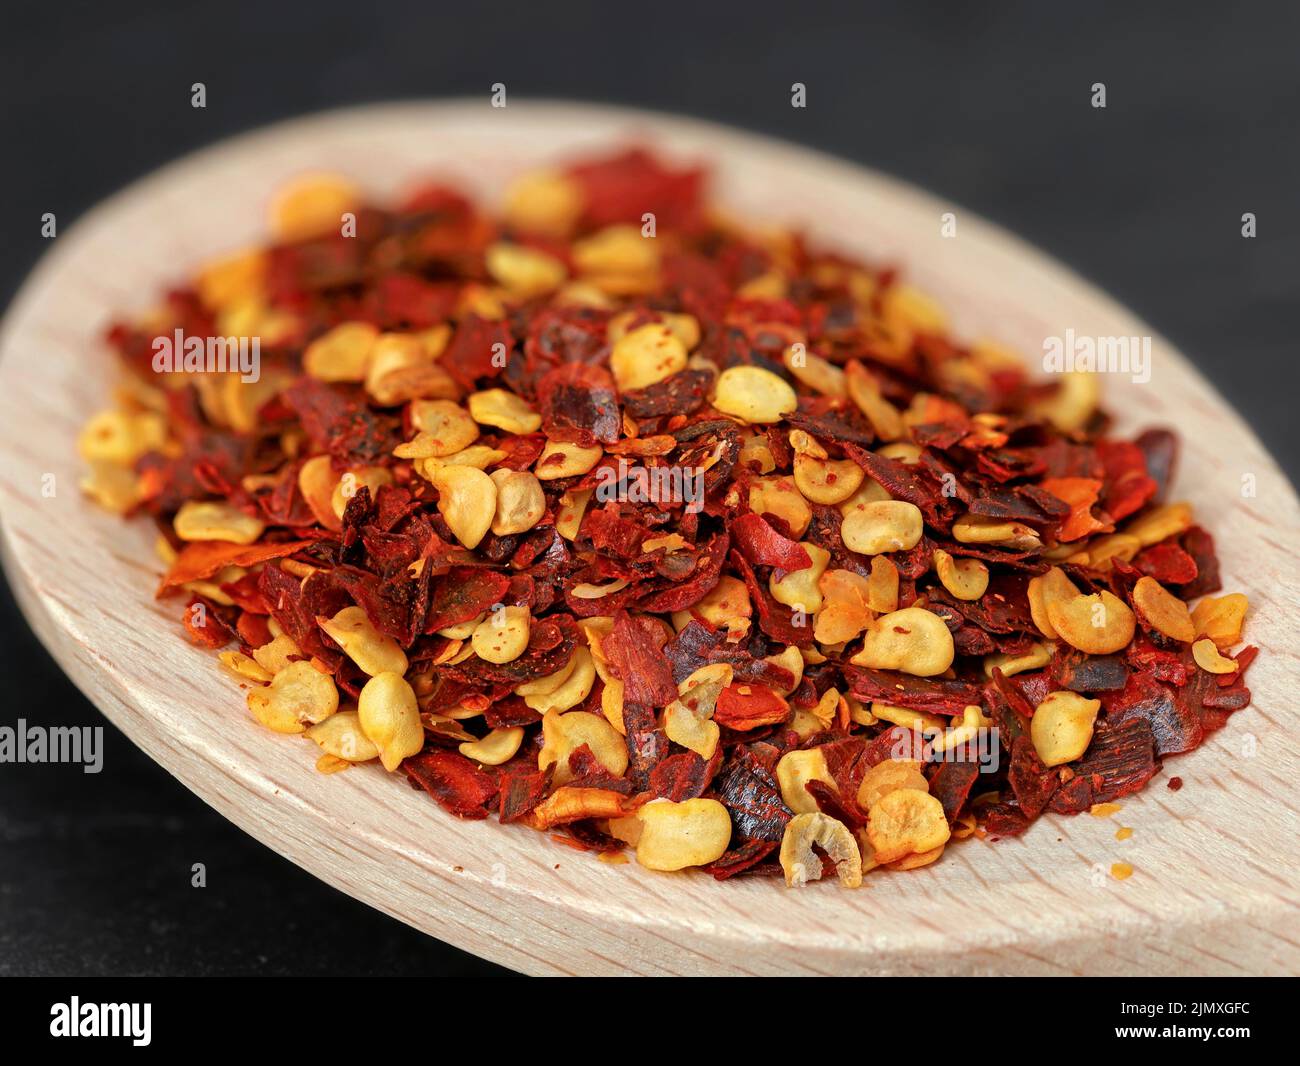 close up of red pepper flakes in wooden cooking spoon, hot ingredient for spicy foods Stock Photo